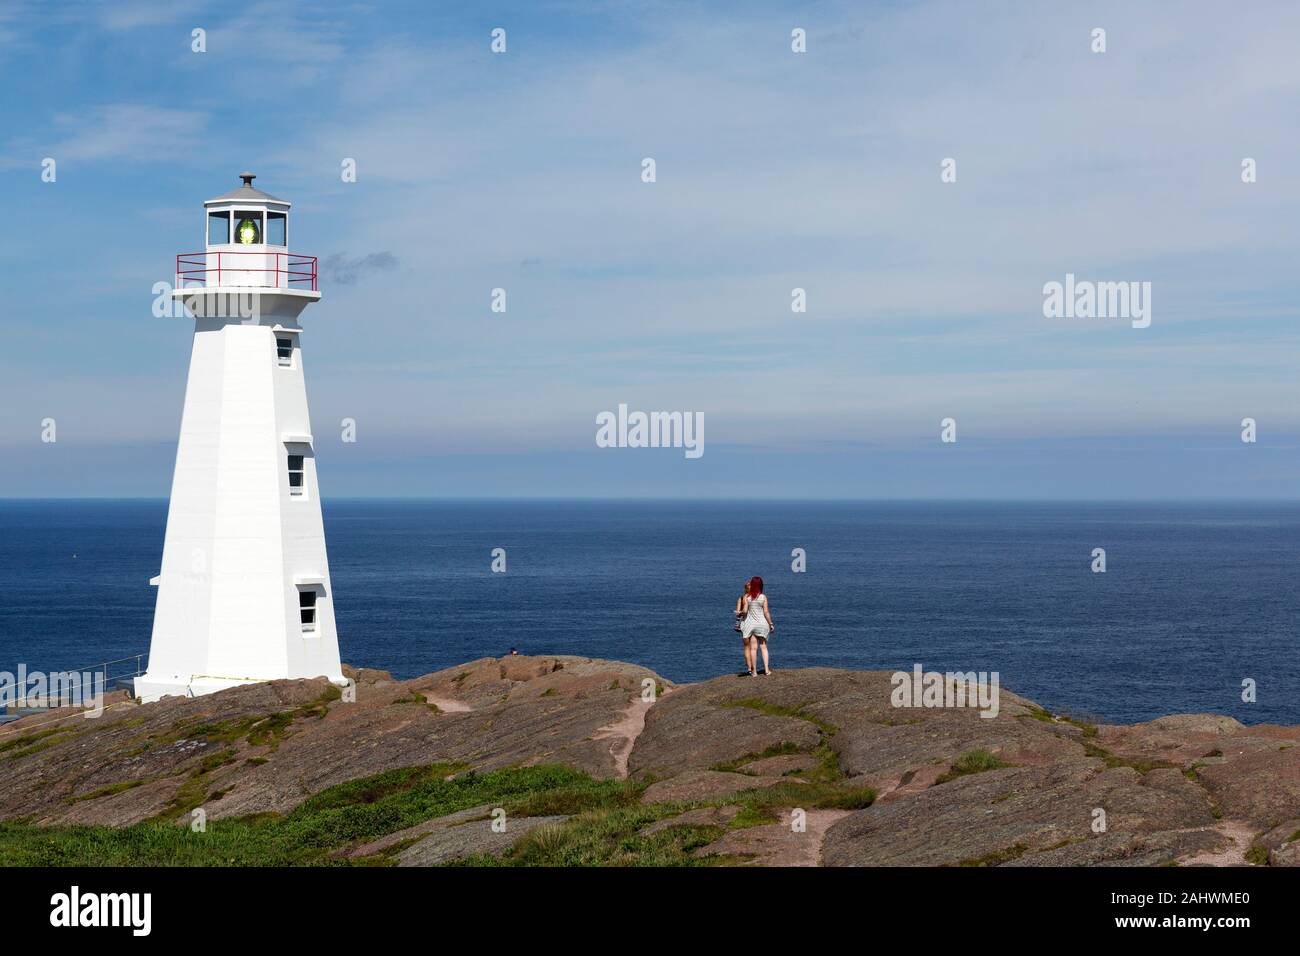 Cape Spear Lighthouse in Newfoundland and Labrador, Canada. Stock Photo